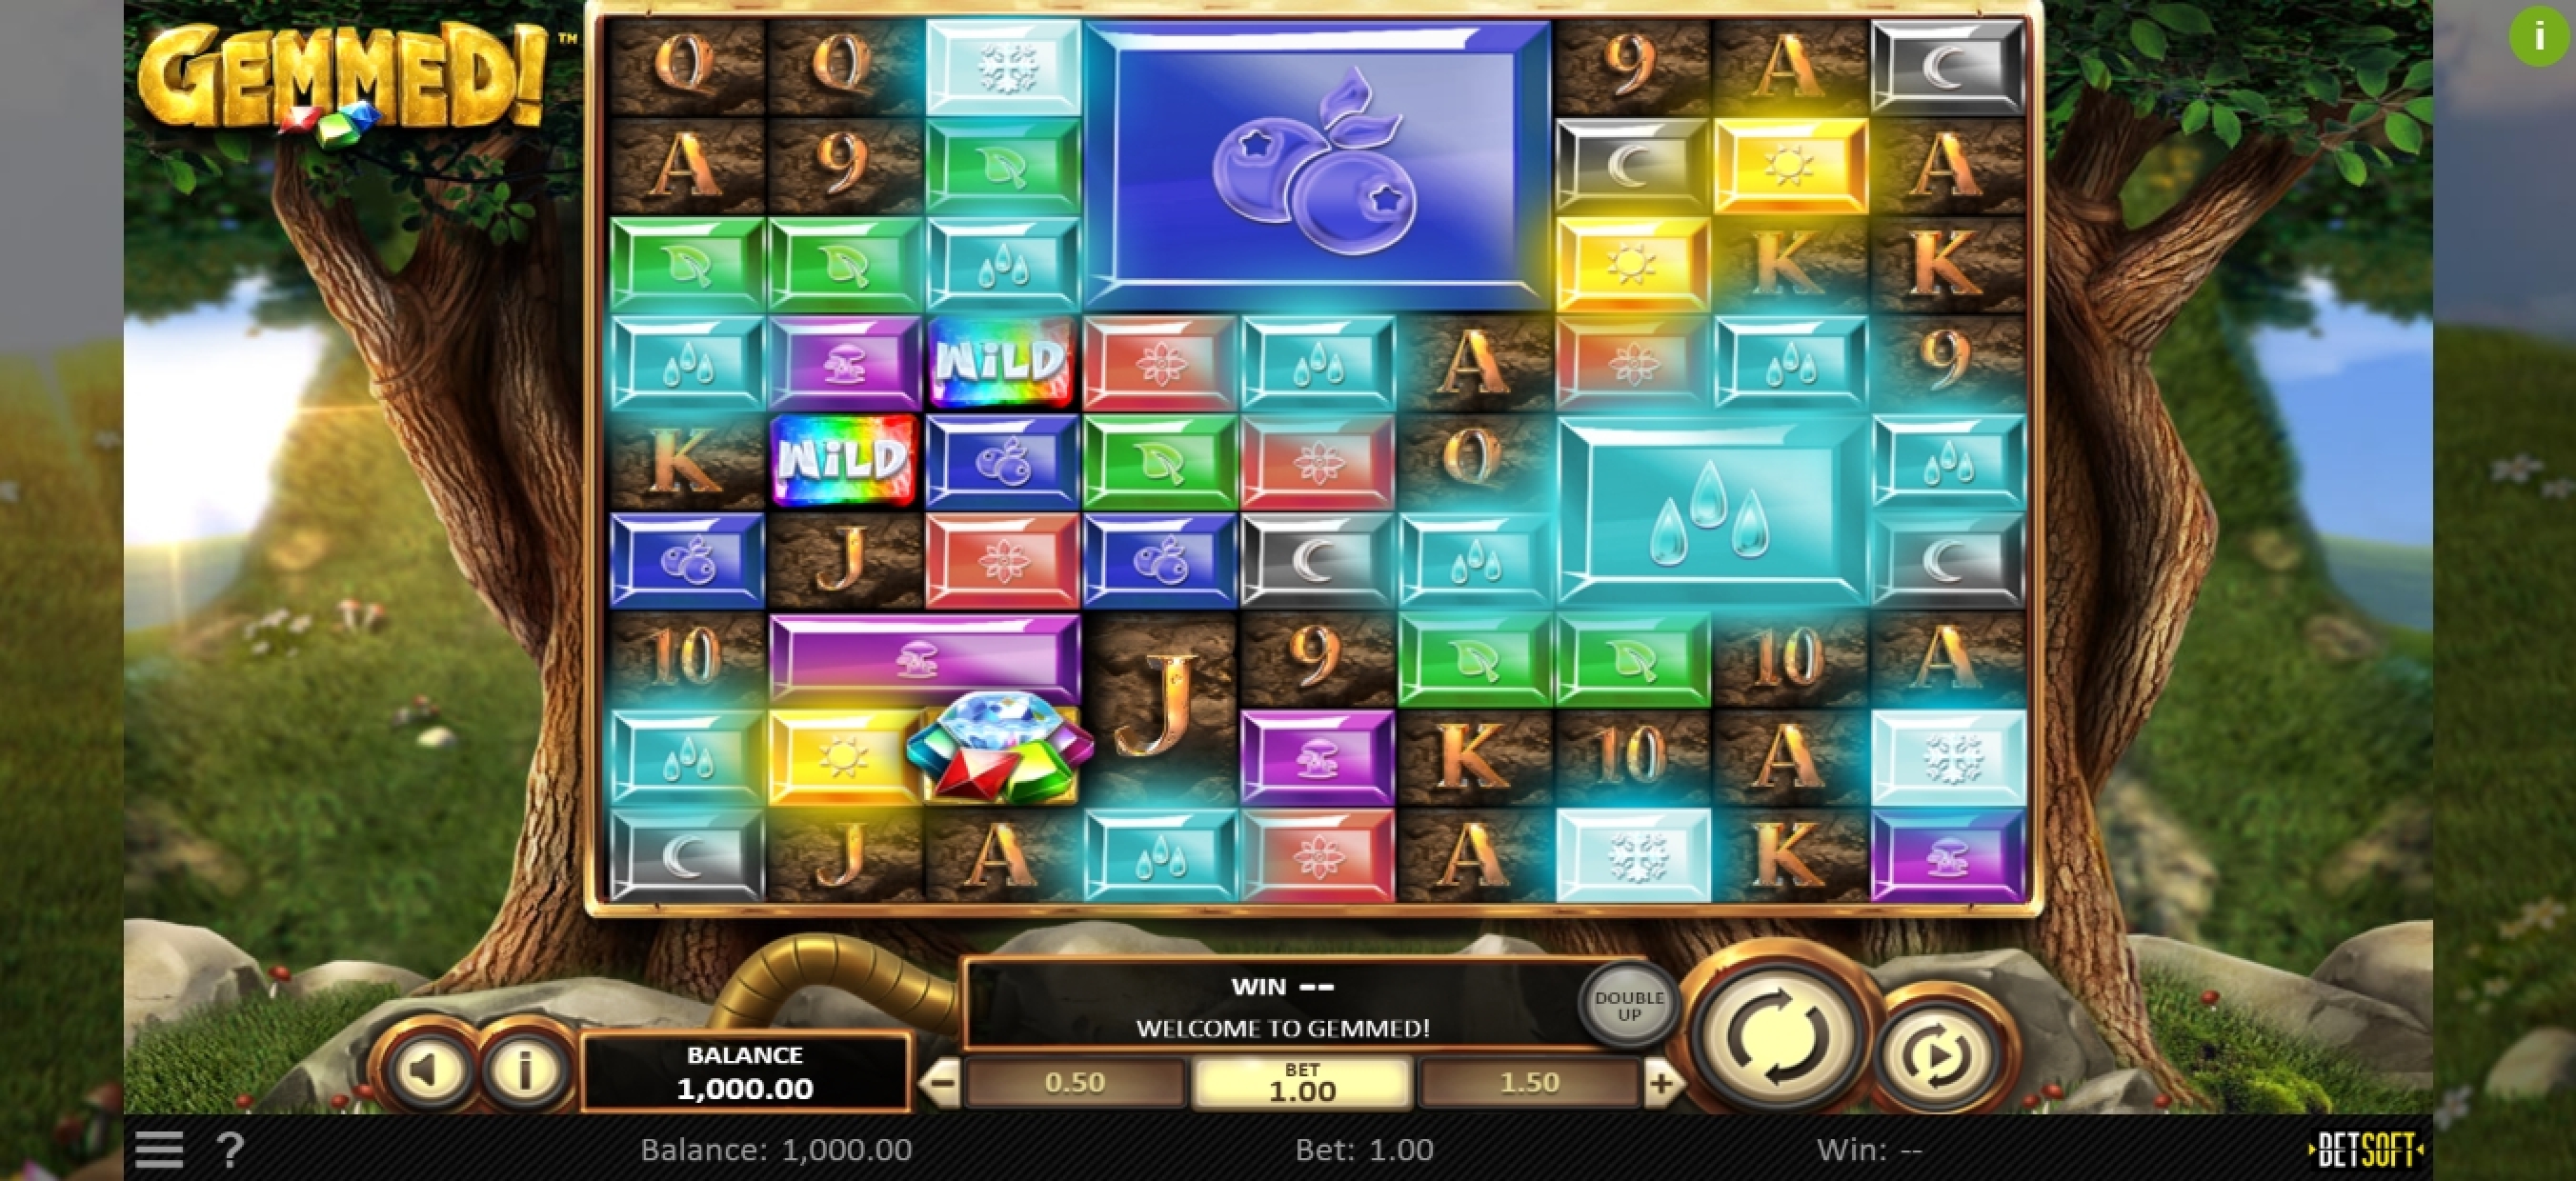 Reels in Gemmed! Slot Game by Betsoft